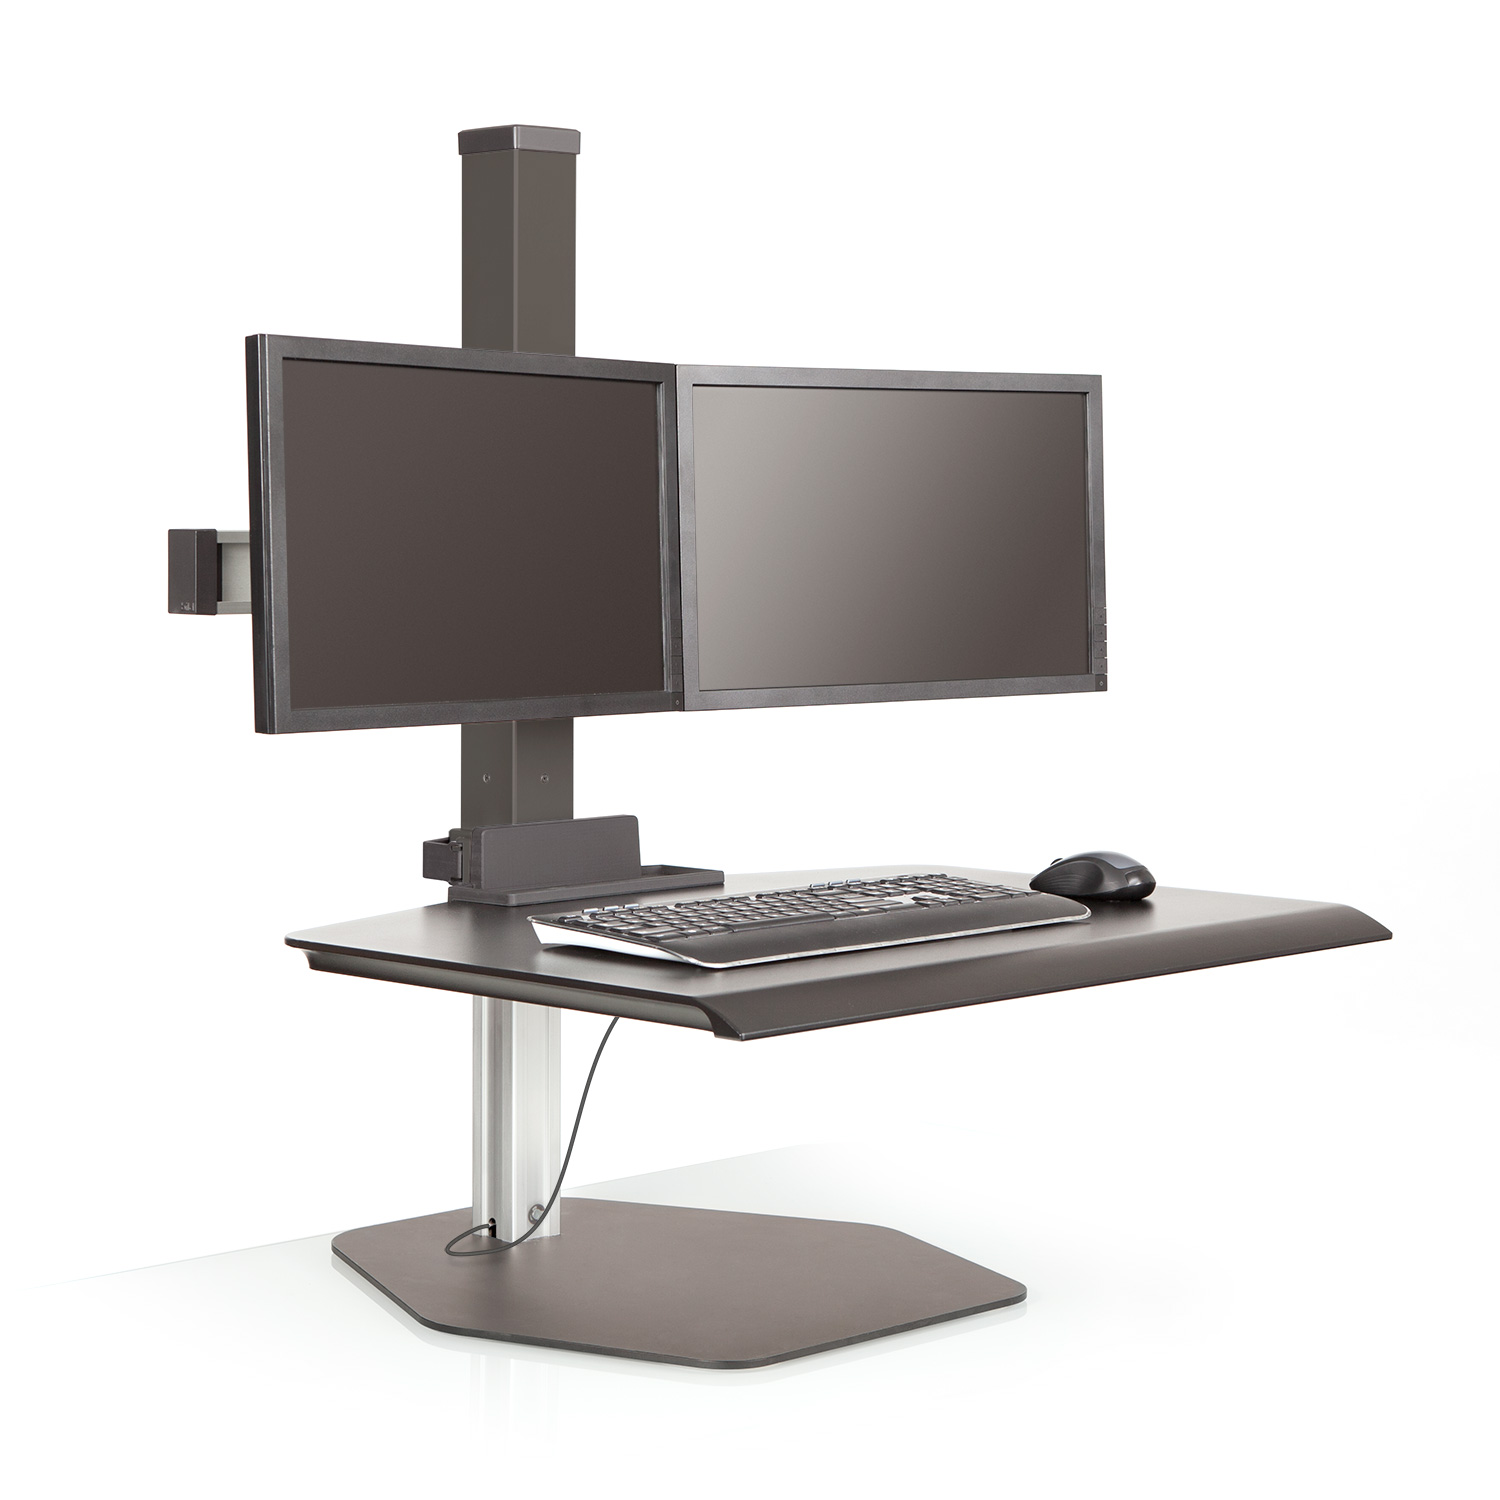 Innovative's new Winston Workstation is a freestanding sit/stand desk that gives users the opportunity to easily stand throughout their workday.